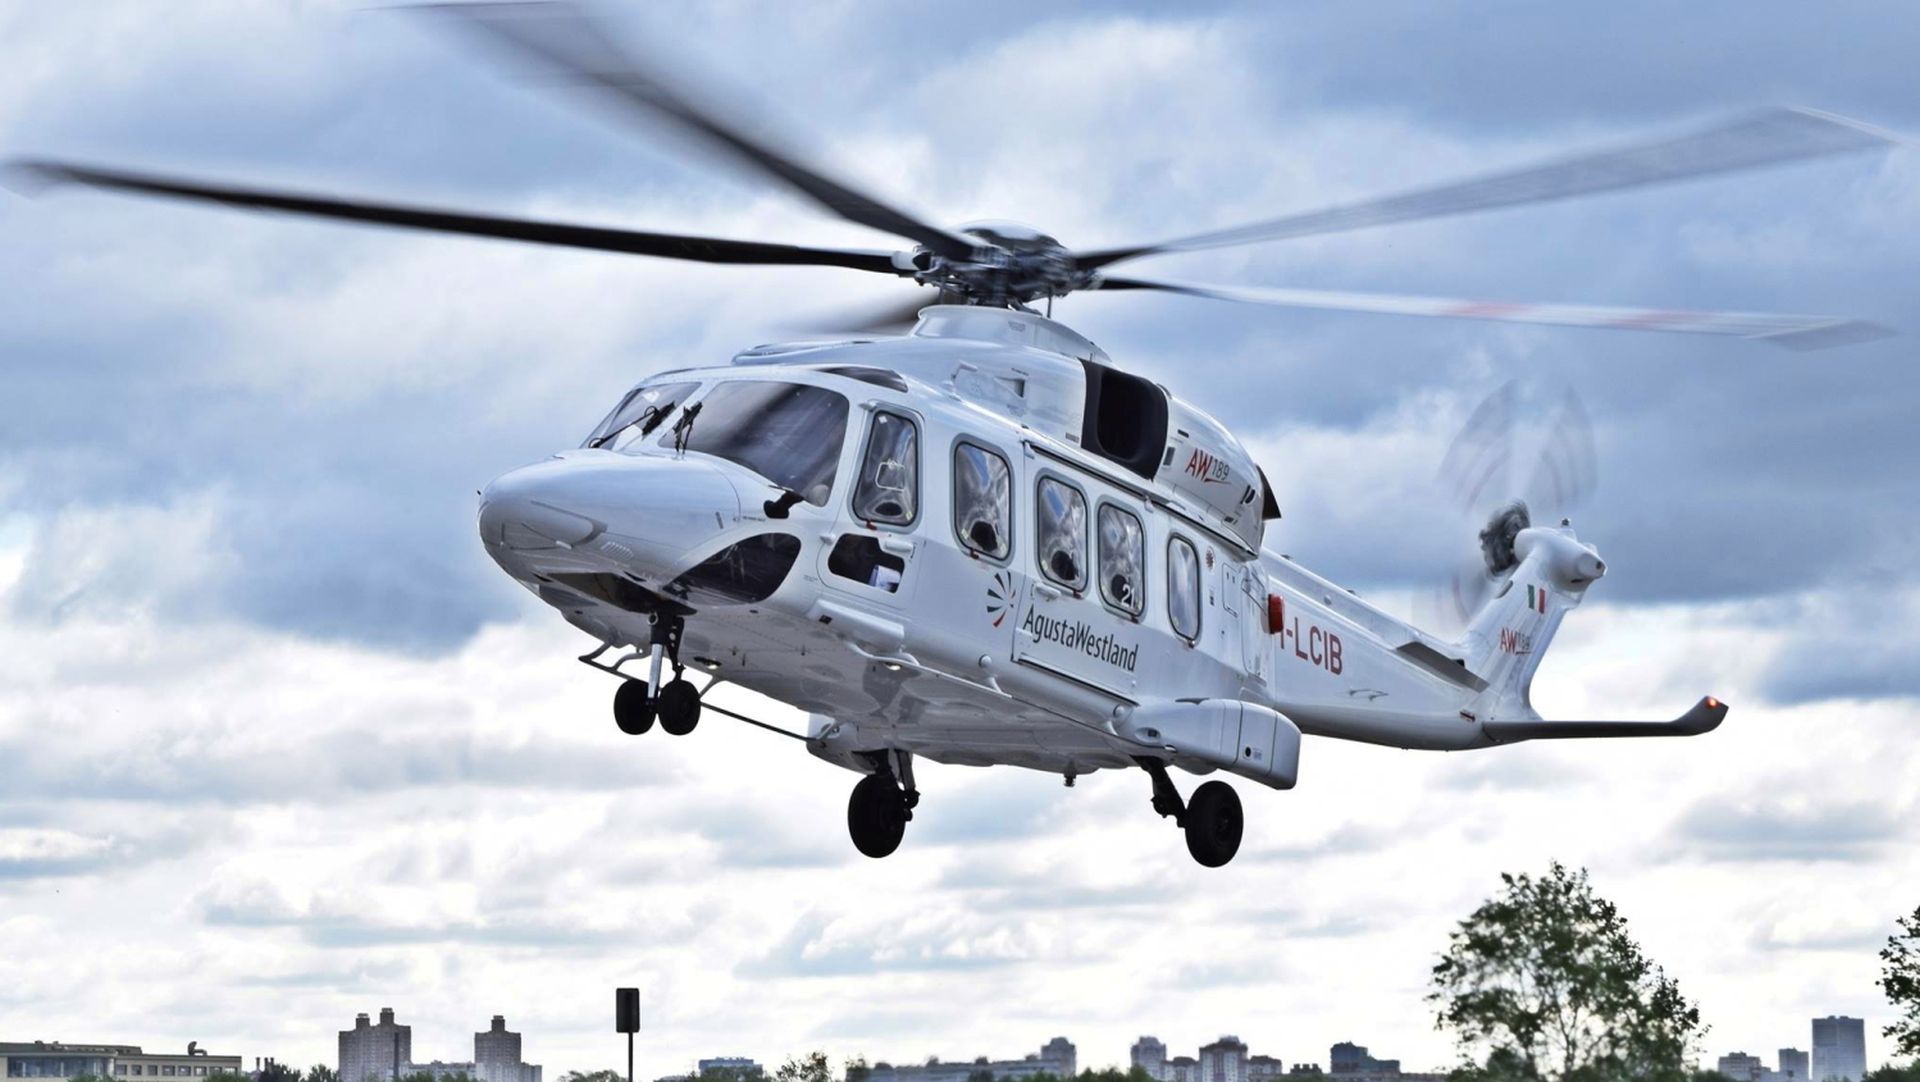 AW189 Helicopter Obtains Russian Civil Certification | DefenceTalk